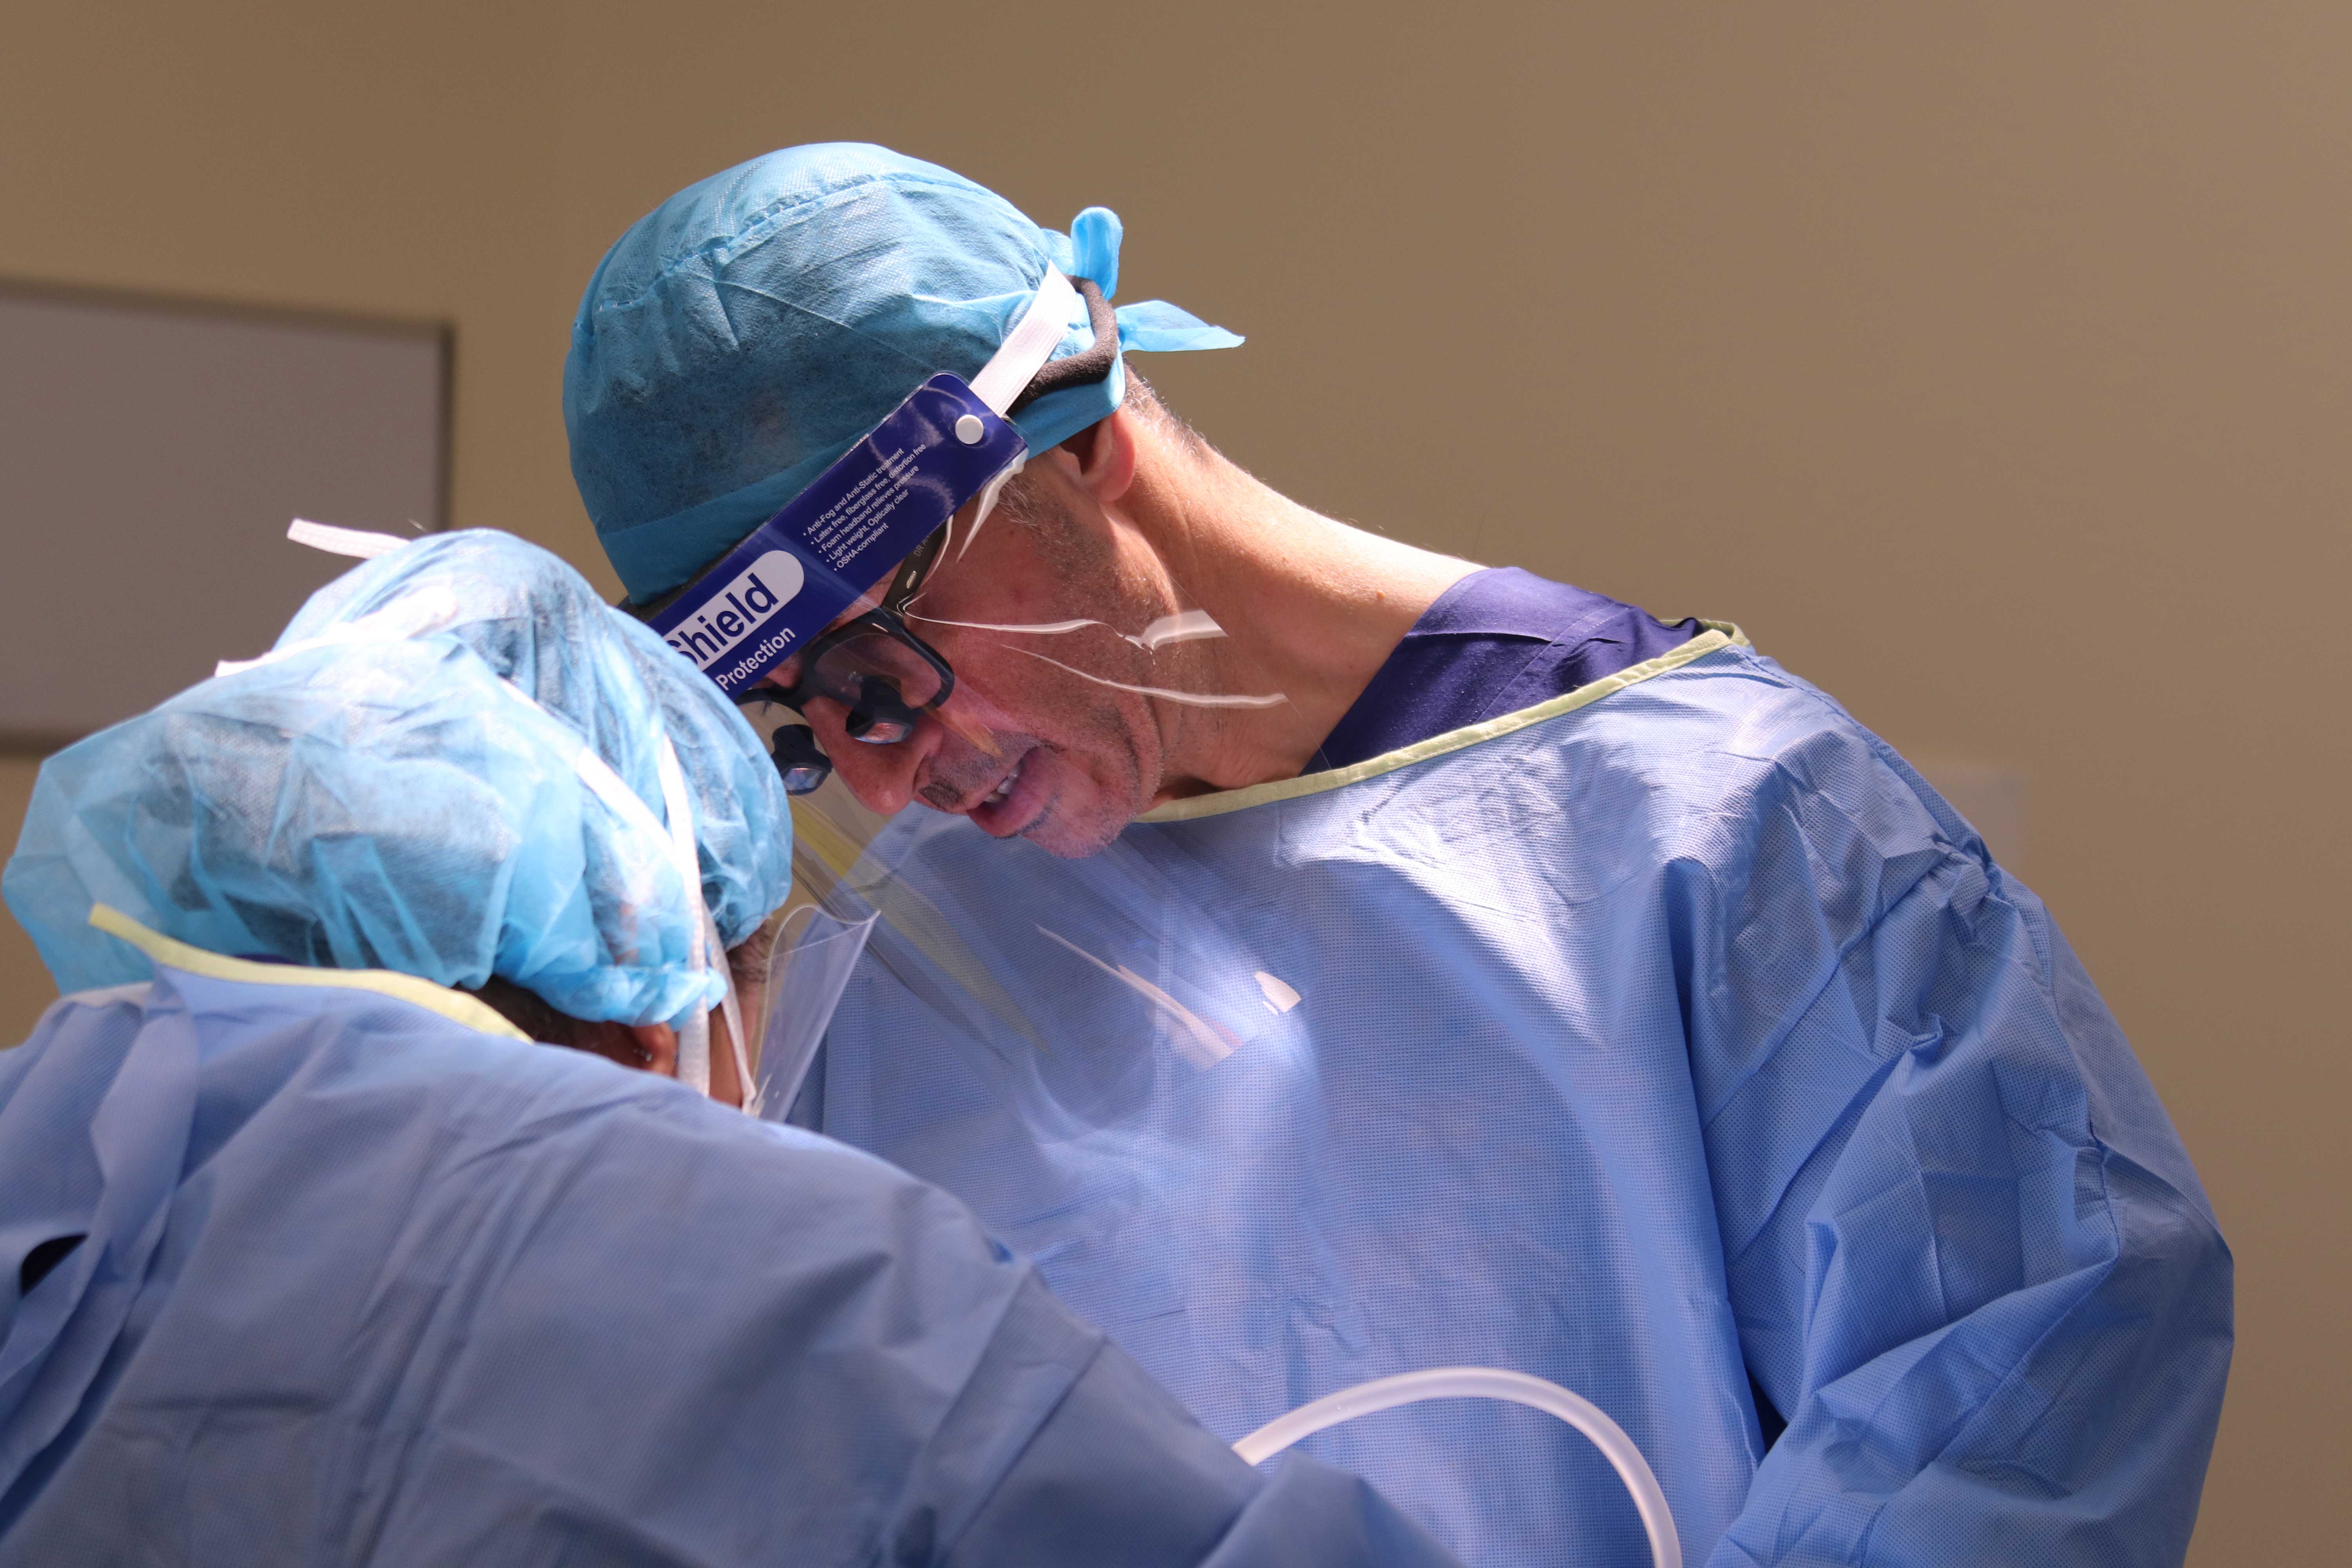 Mohs Surgery Sydney image of Dr Anthony Maloof, operating on a patient. Deep concentration can be seen through the visor. Loops are worn to zoom in on the surgery.